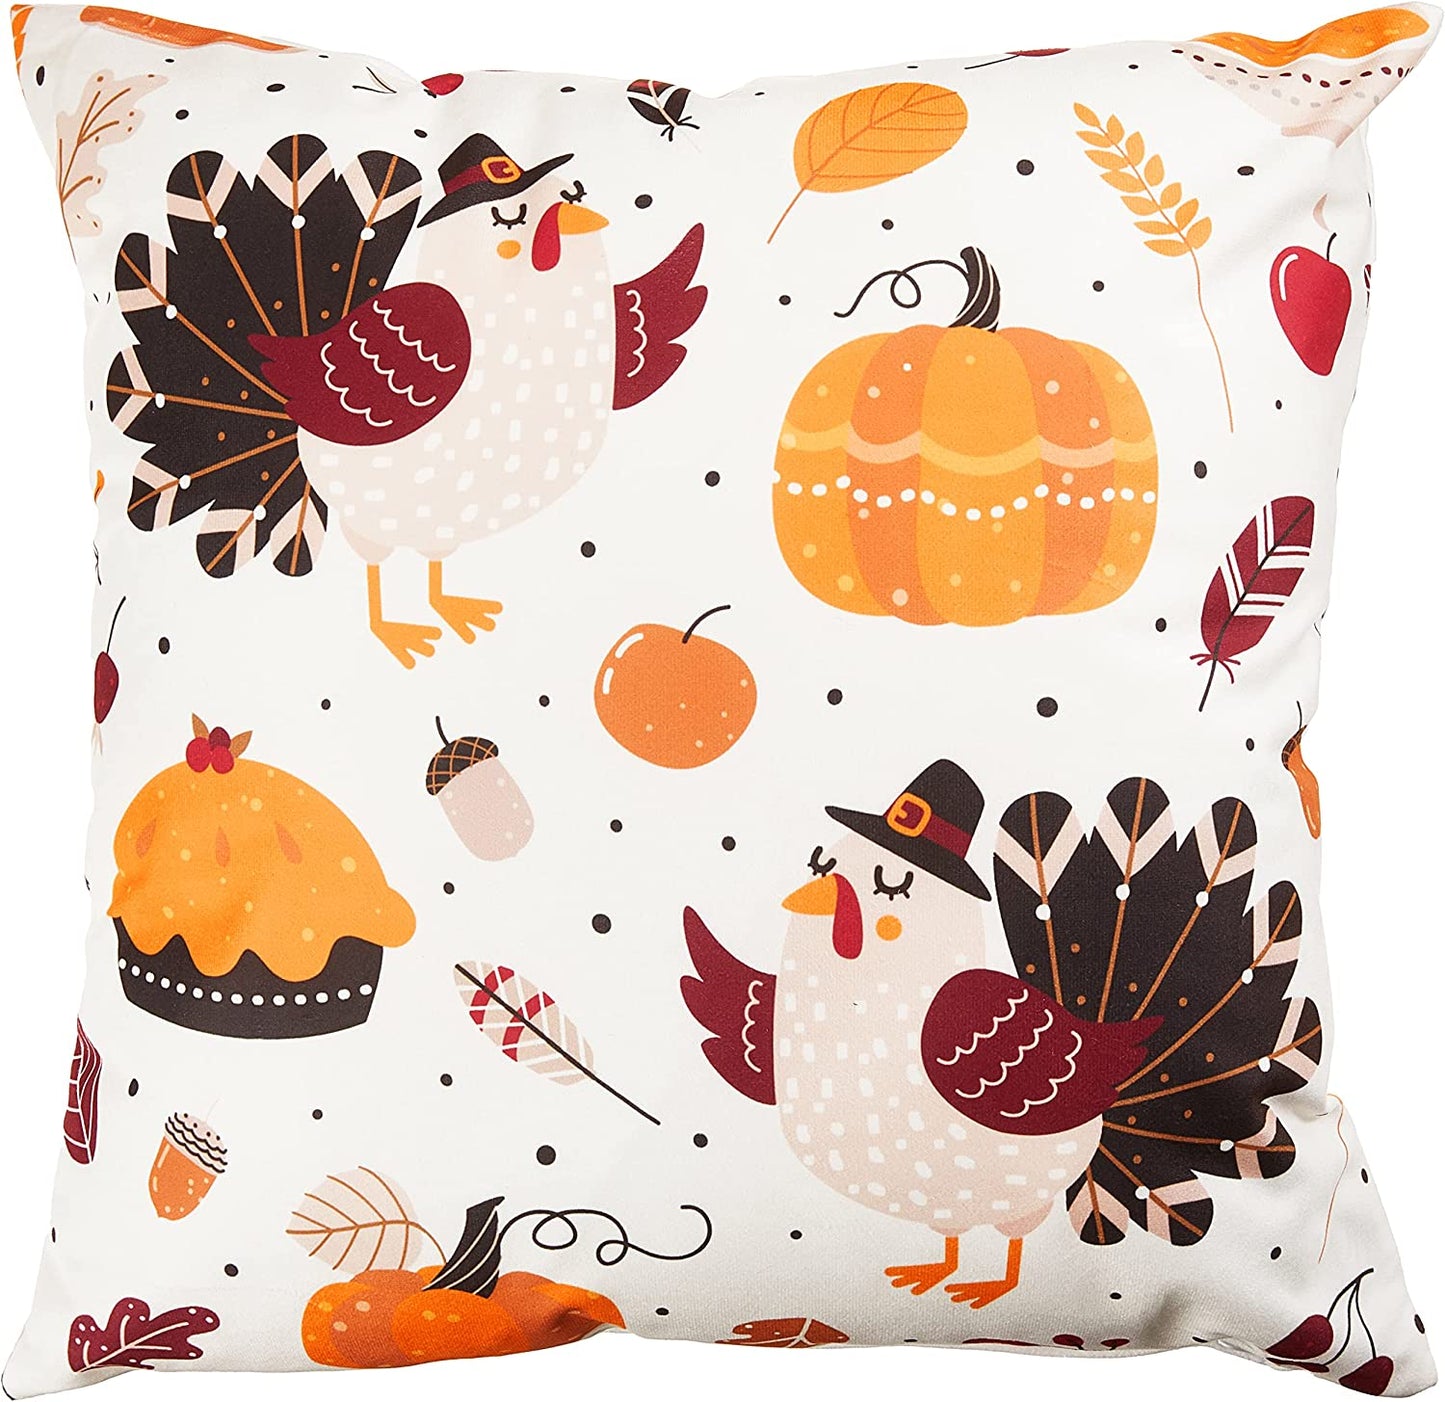 Fall Harvest Thanksgiving Colors Adorning Pattern Decorative Accent Throw Pillow